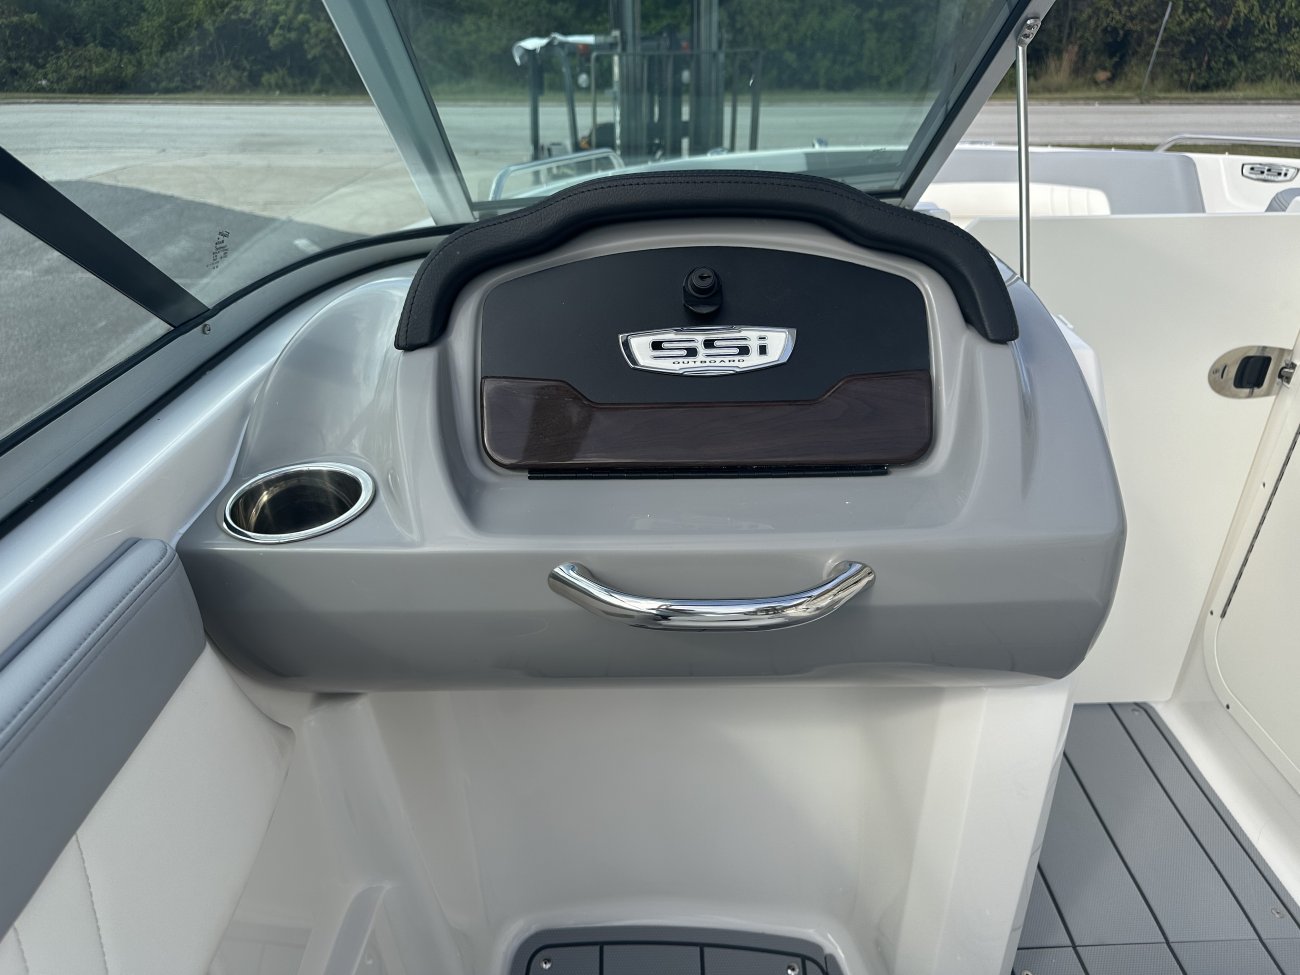 A 23 SSI Sport Outboard is a Power and could be classed as a Bowrider, Deck Boat, Dual Console, High Performance, Runabout,  or, just an overall Great Boat!